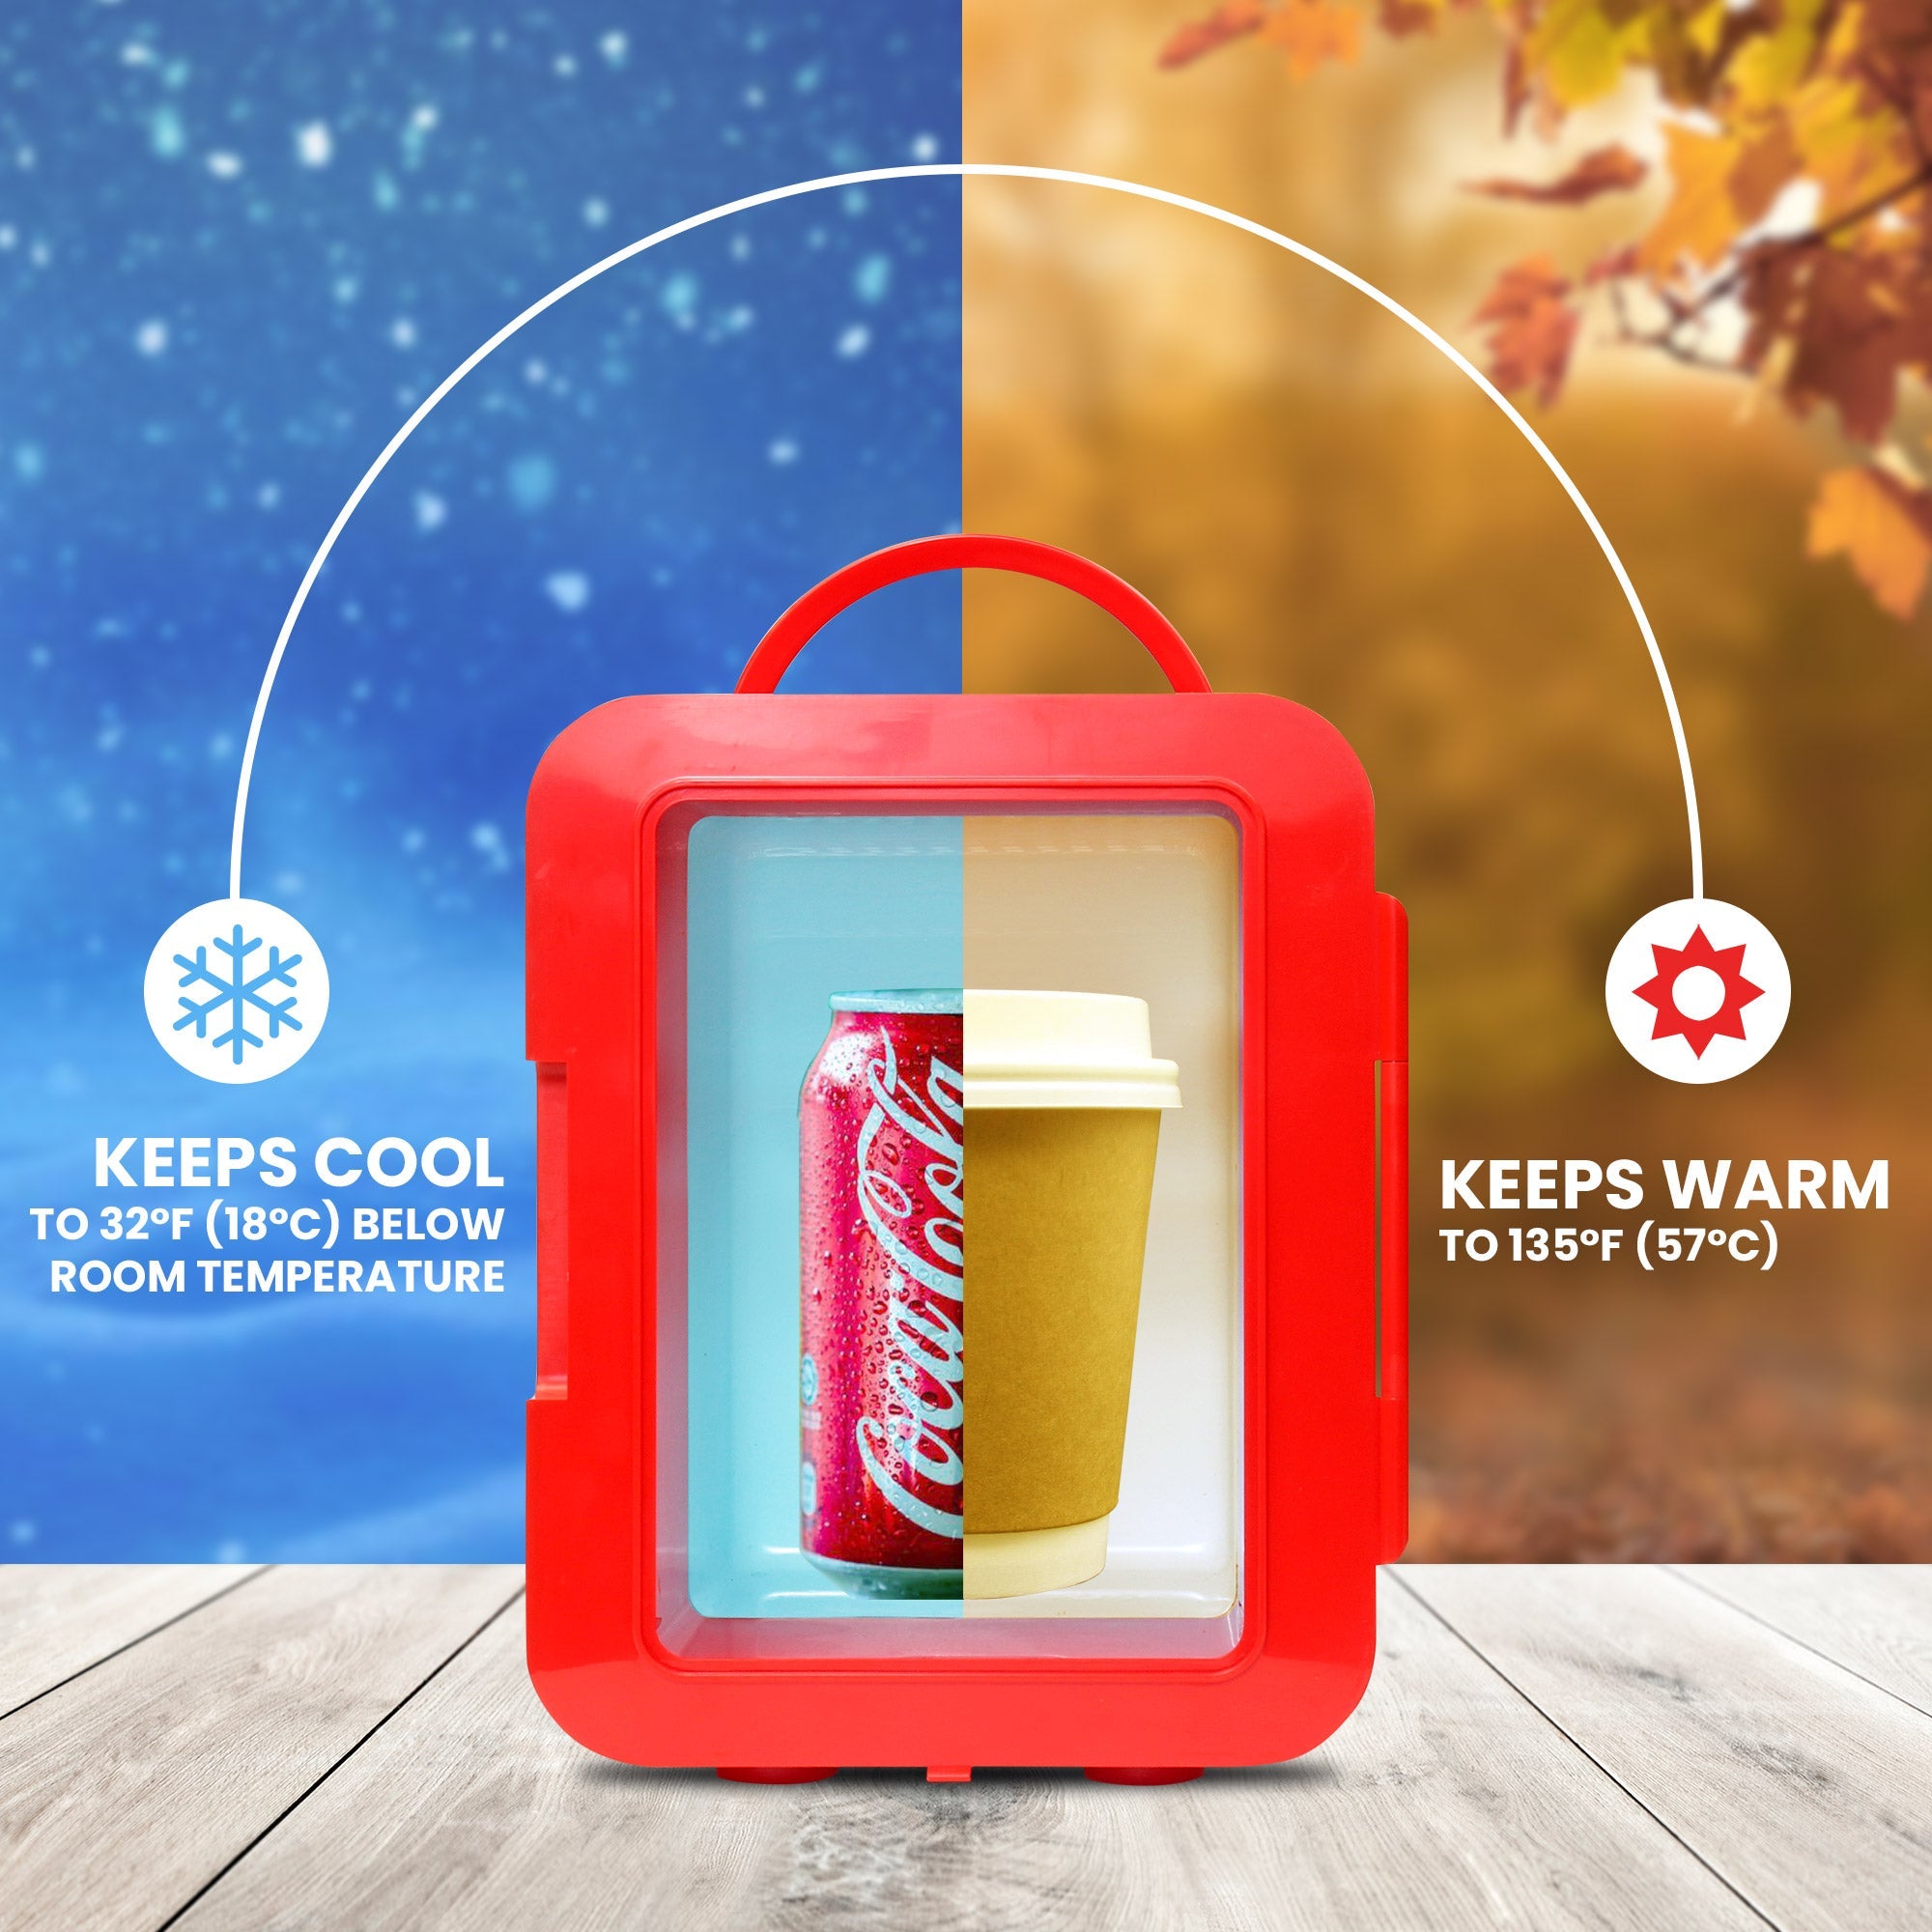  Coca-Cola 4L Portable Cooler/Warmer, Compact Personal Travel  Fridge for Snacks Lunch Drinks Cosmetics, Includes 12V and AC Cords, Cute  Desk Accessory for Home Office Dorm Travel, Red, Polar Bear : Everything